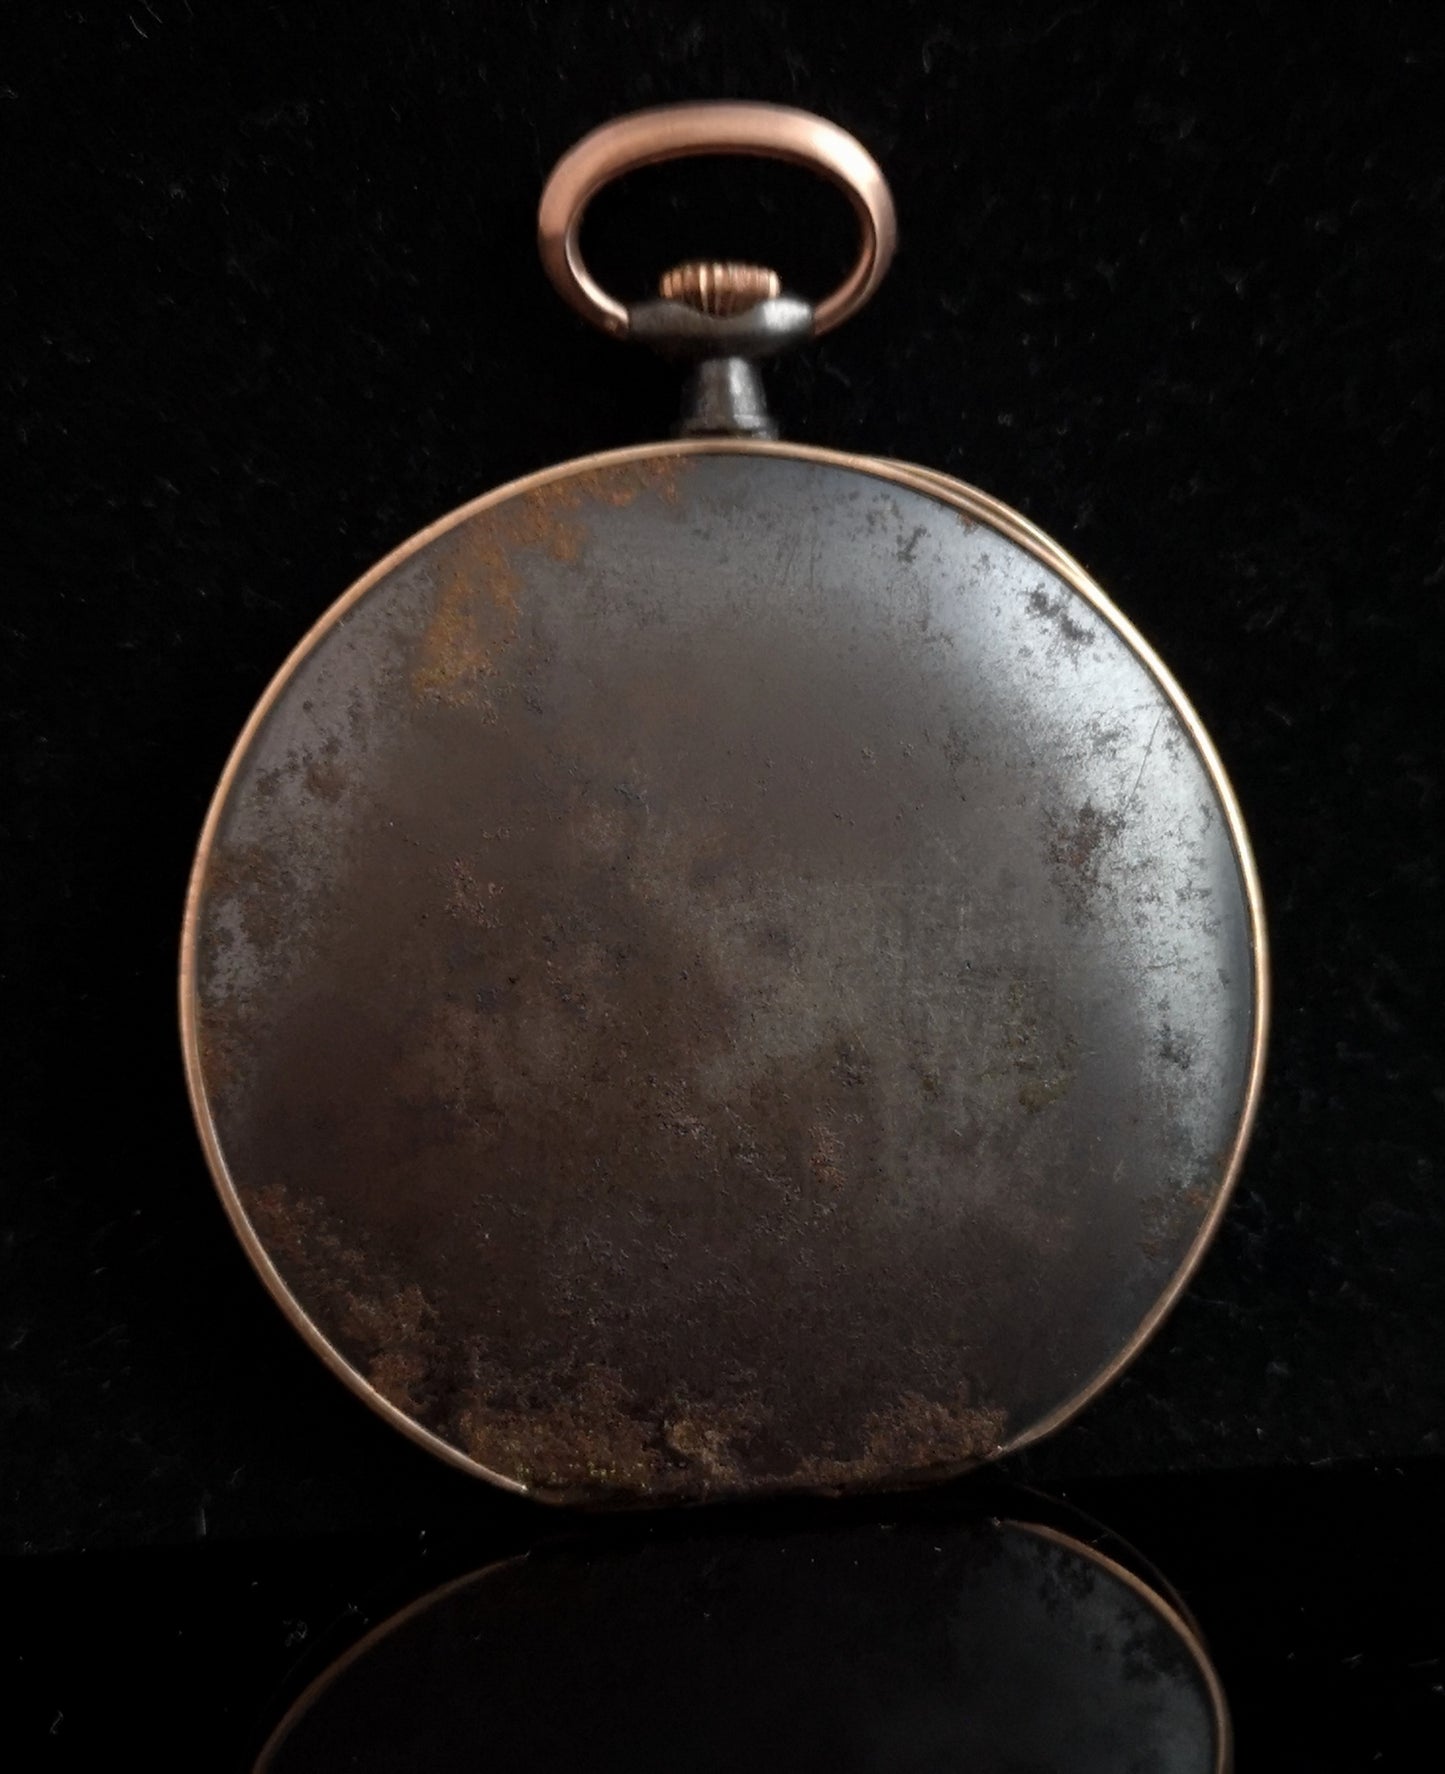 Antique French pocket watch, gold and gunmetal, working